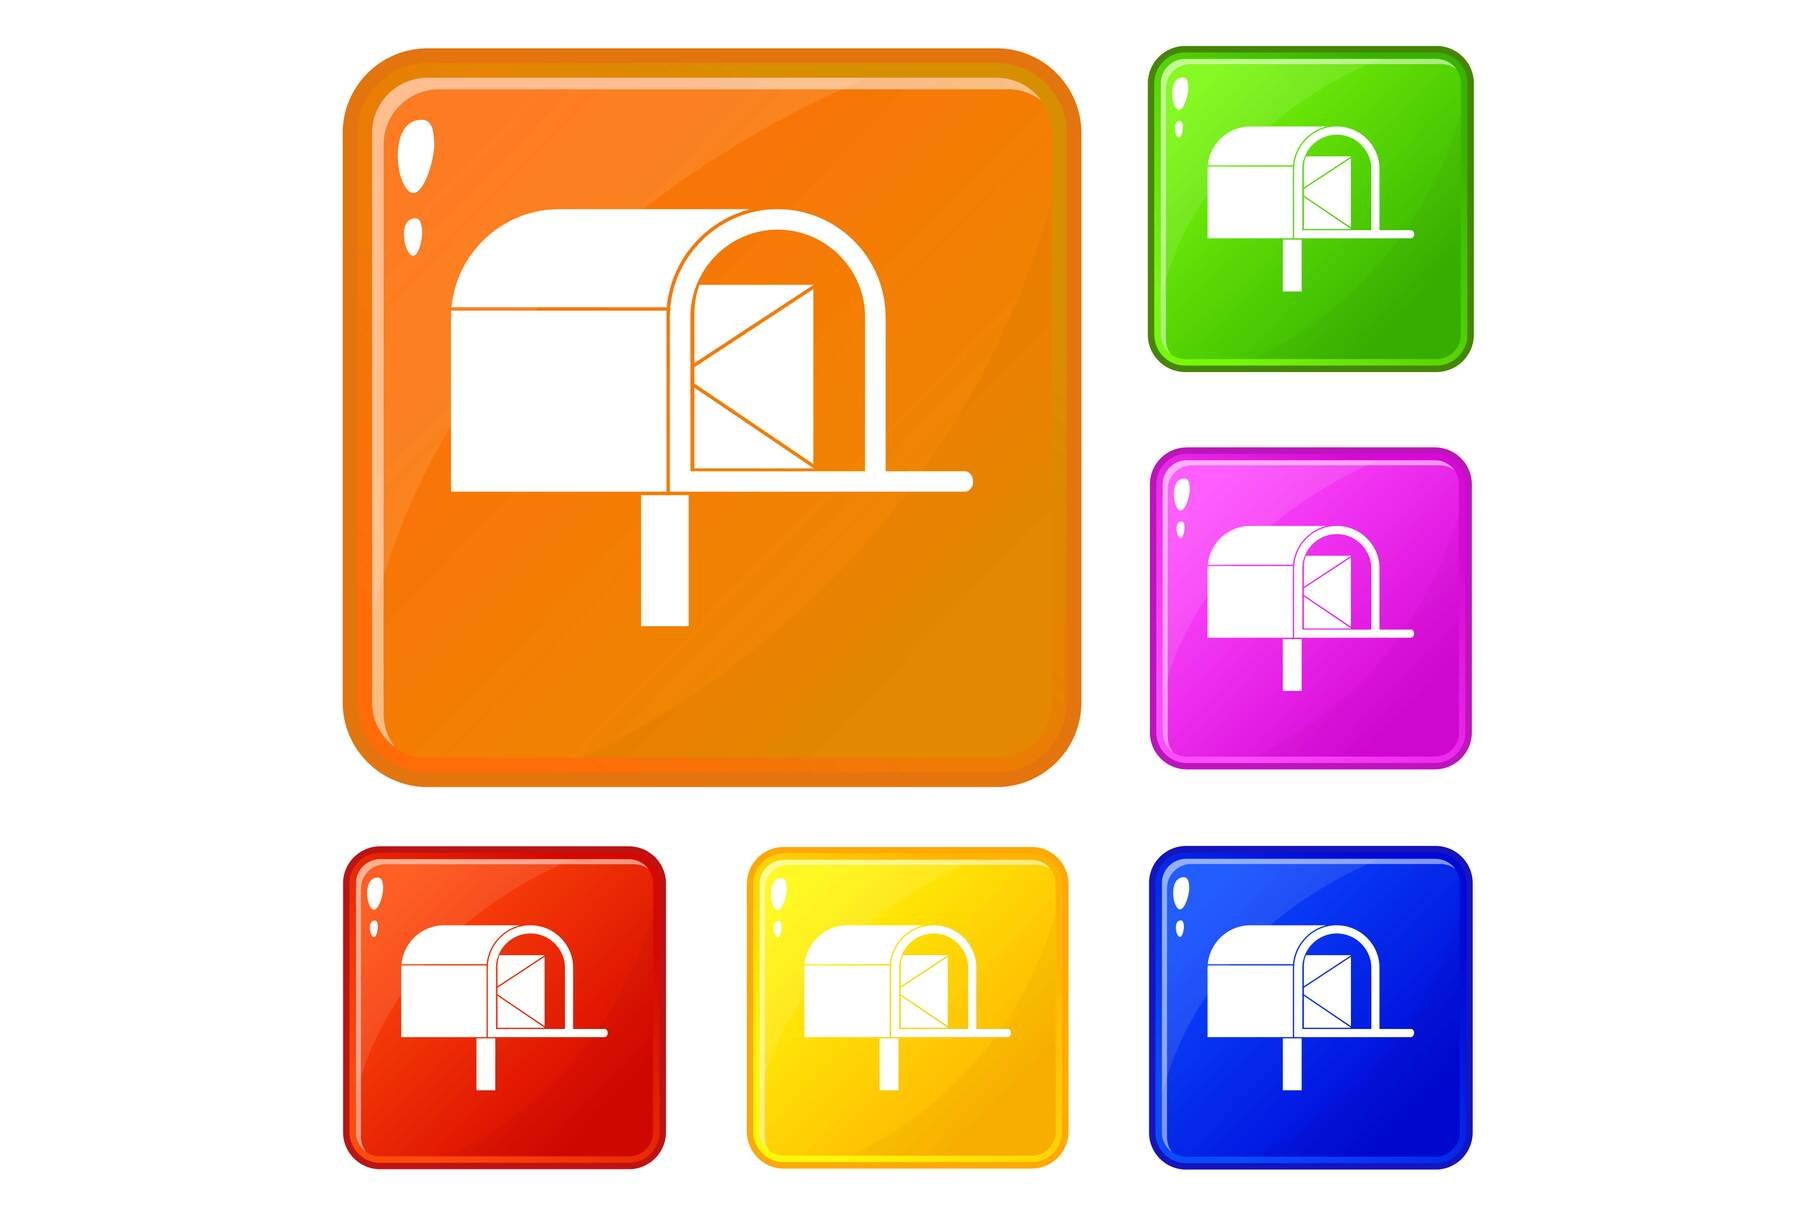 Mailbox icons set vector color cover image.